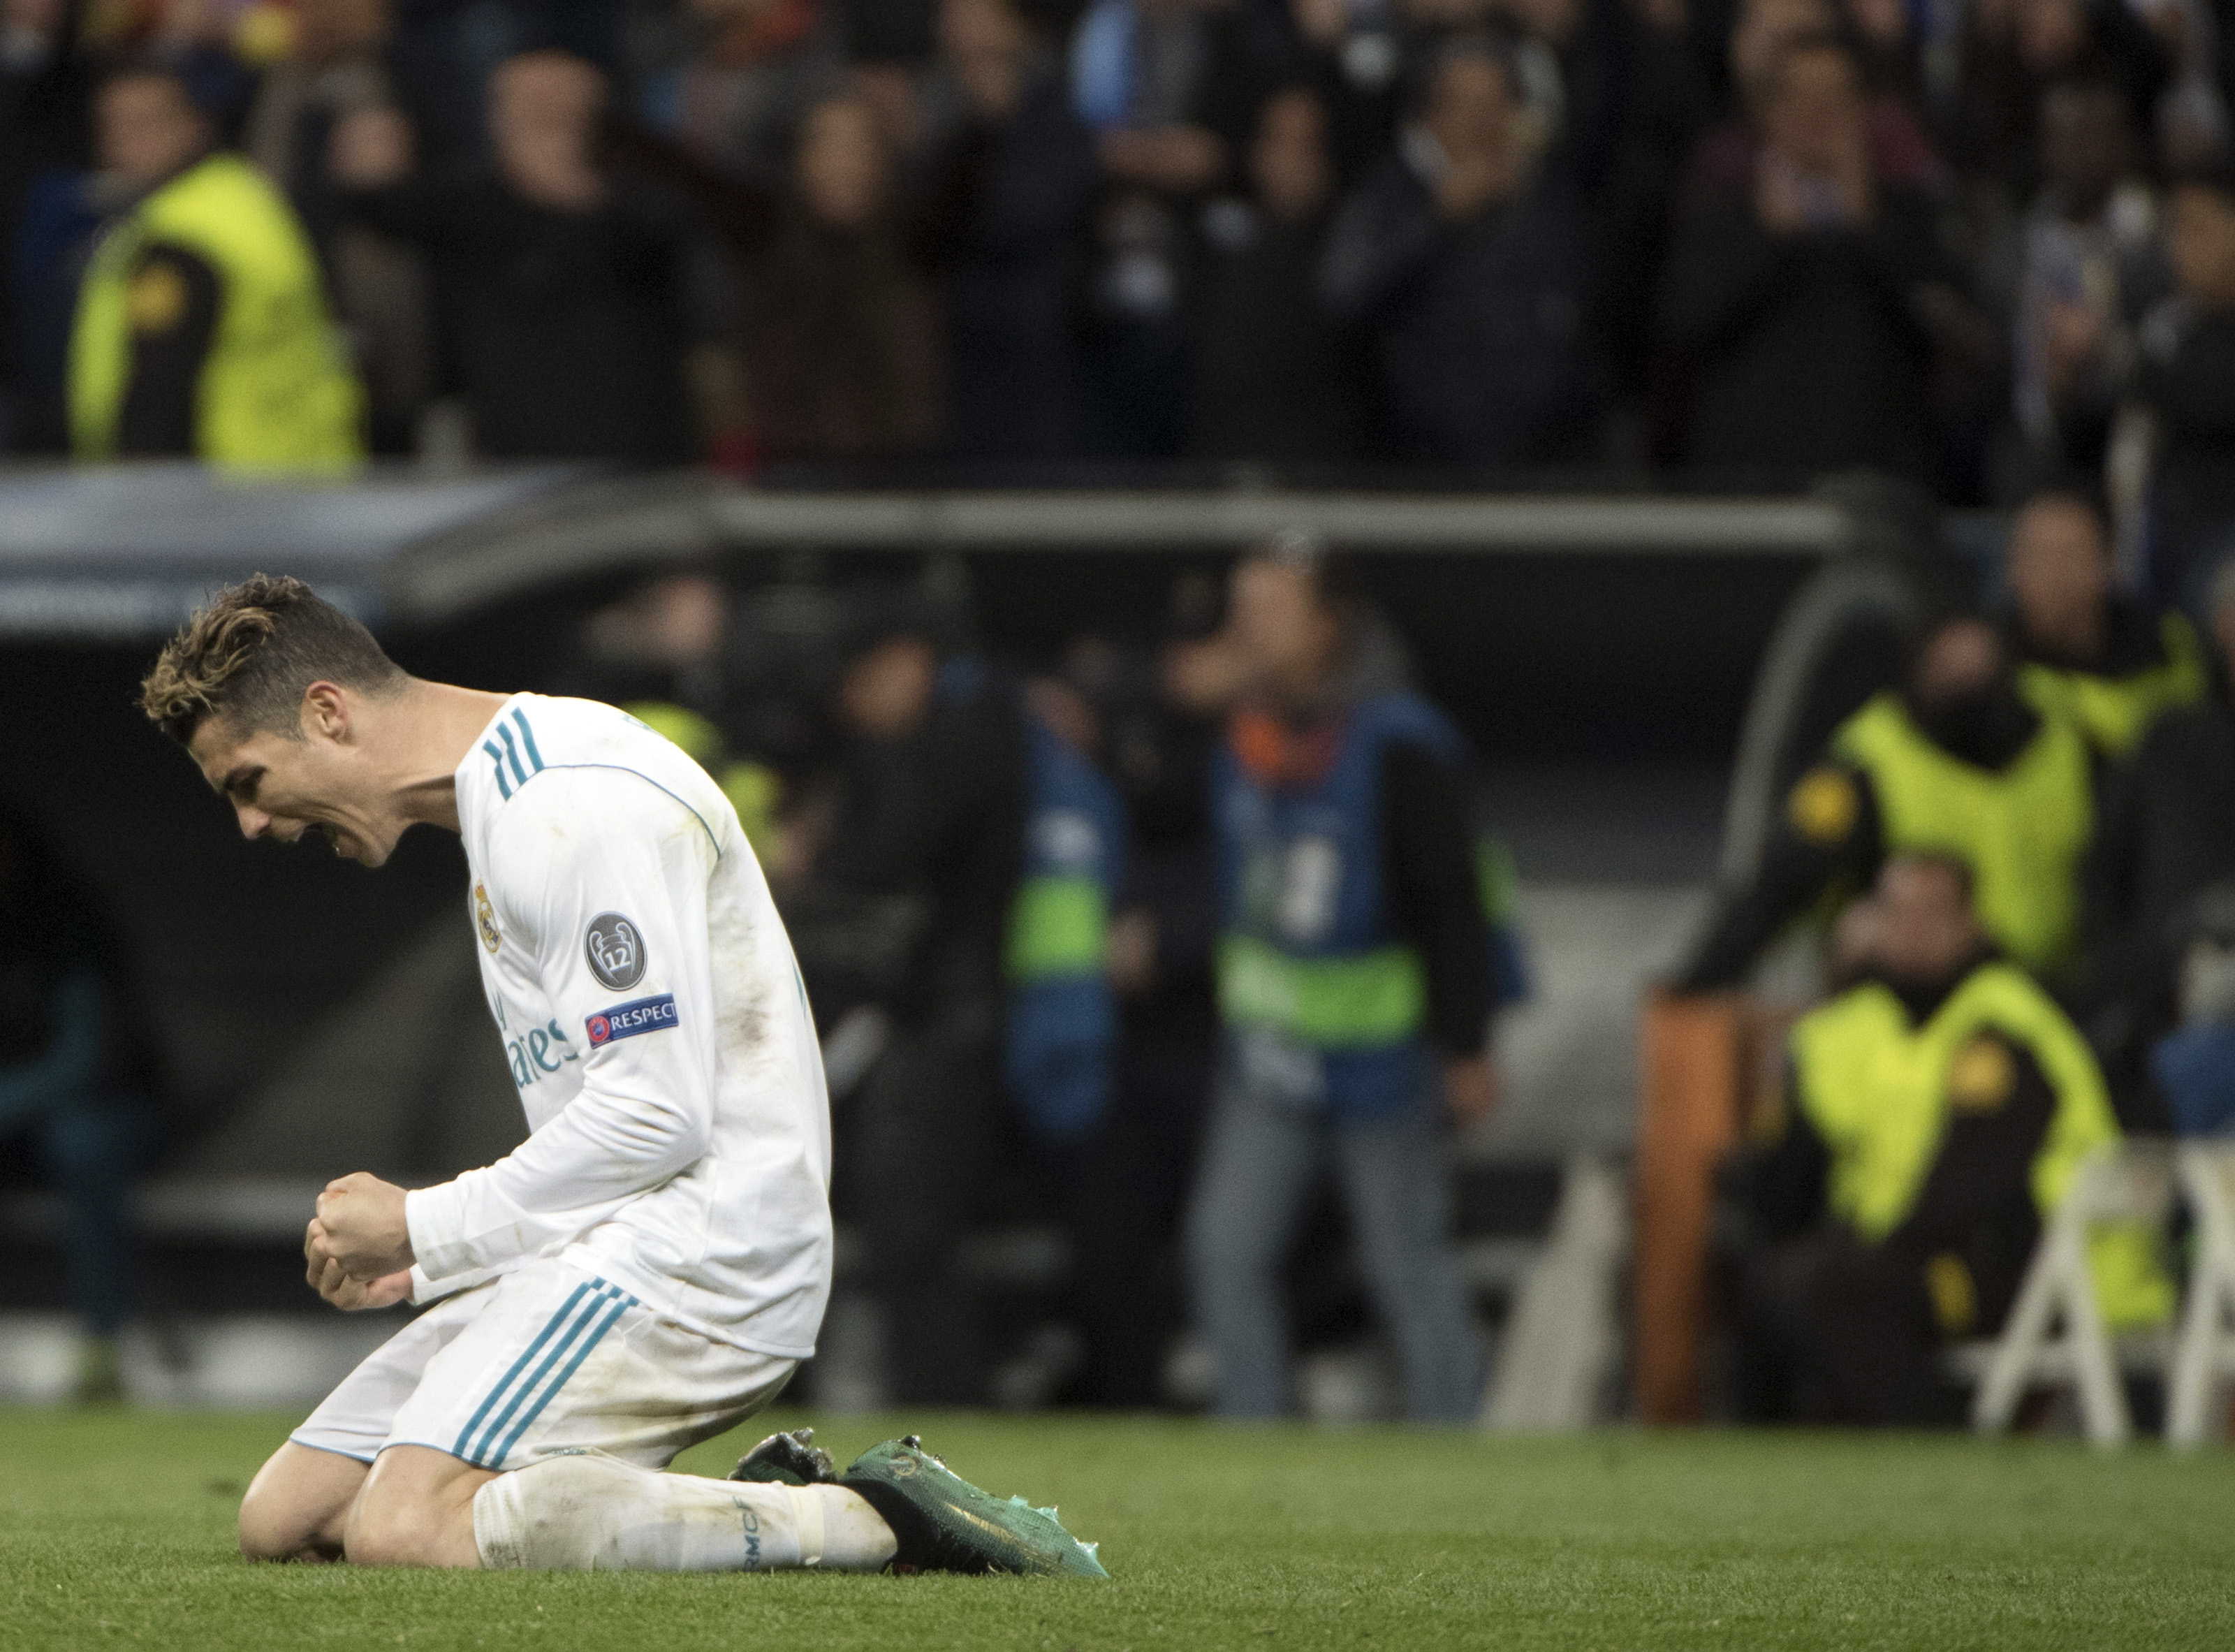 TOPSHOT - Real Madrid's Portuguese forward Cristiano Ronaldo celebrates at the end of the the UEFA Champions League quarter-final second leg football match between Real Madrid CF and Juventus FC at the Santiago Bernabeu stadium in Madrid on April 11, 2018. / AFP PHOTO / CURTO DE LA TORRE        (Photo credit should read CURTO DE LA TORRE/AFP/Getty Images)